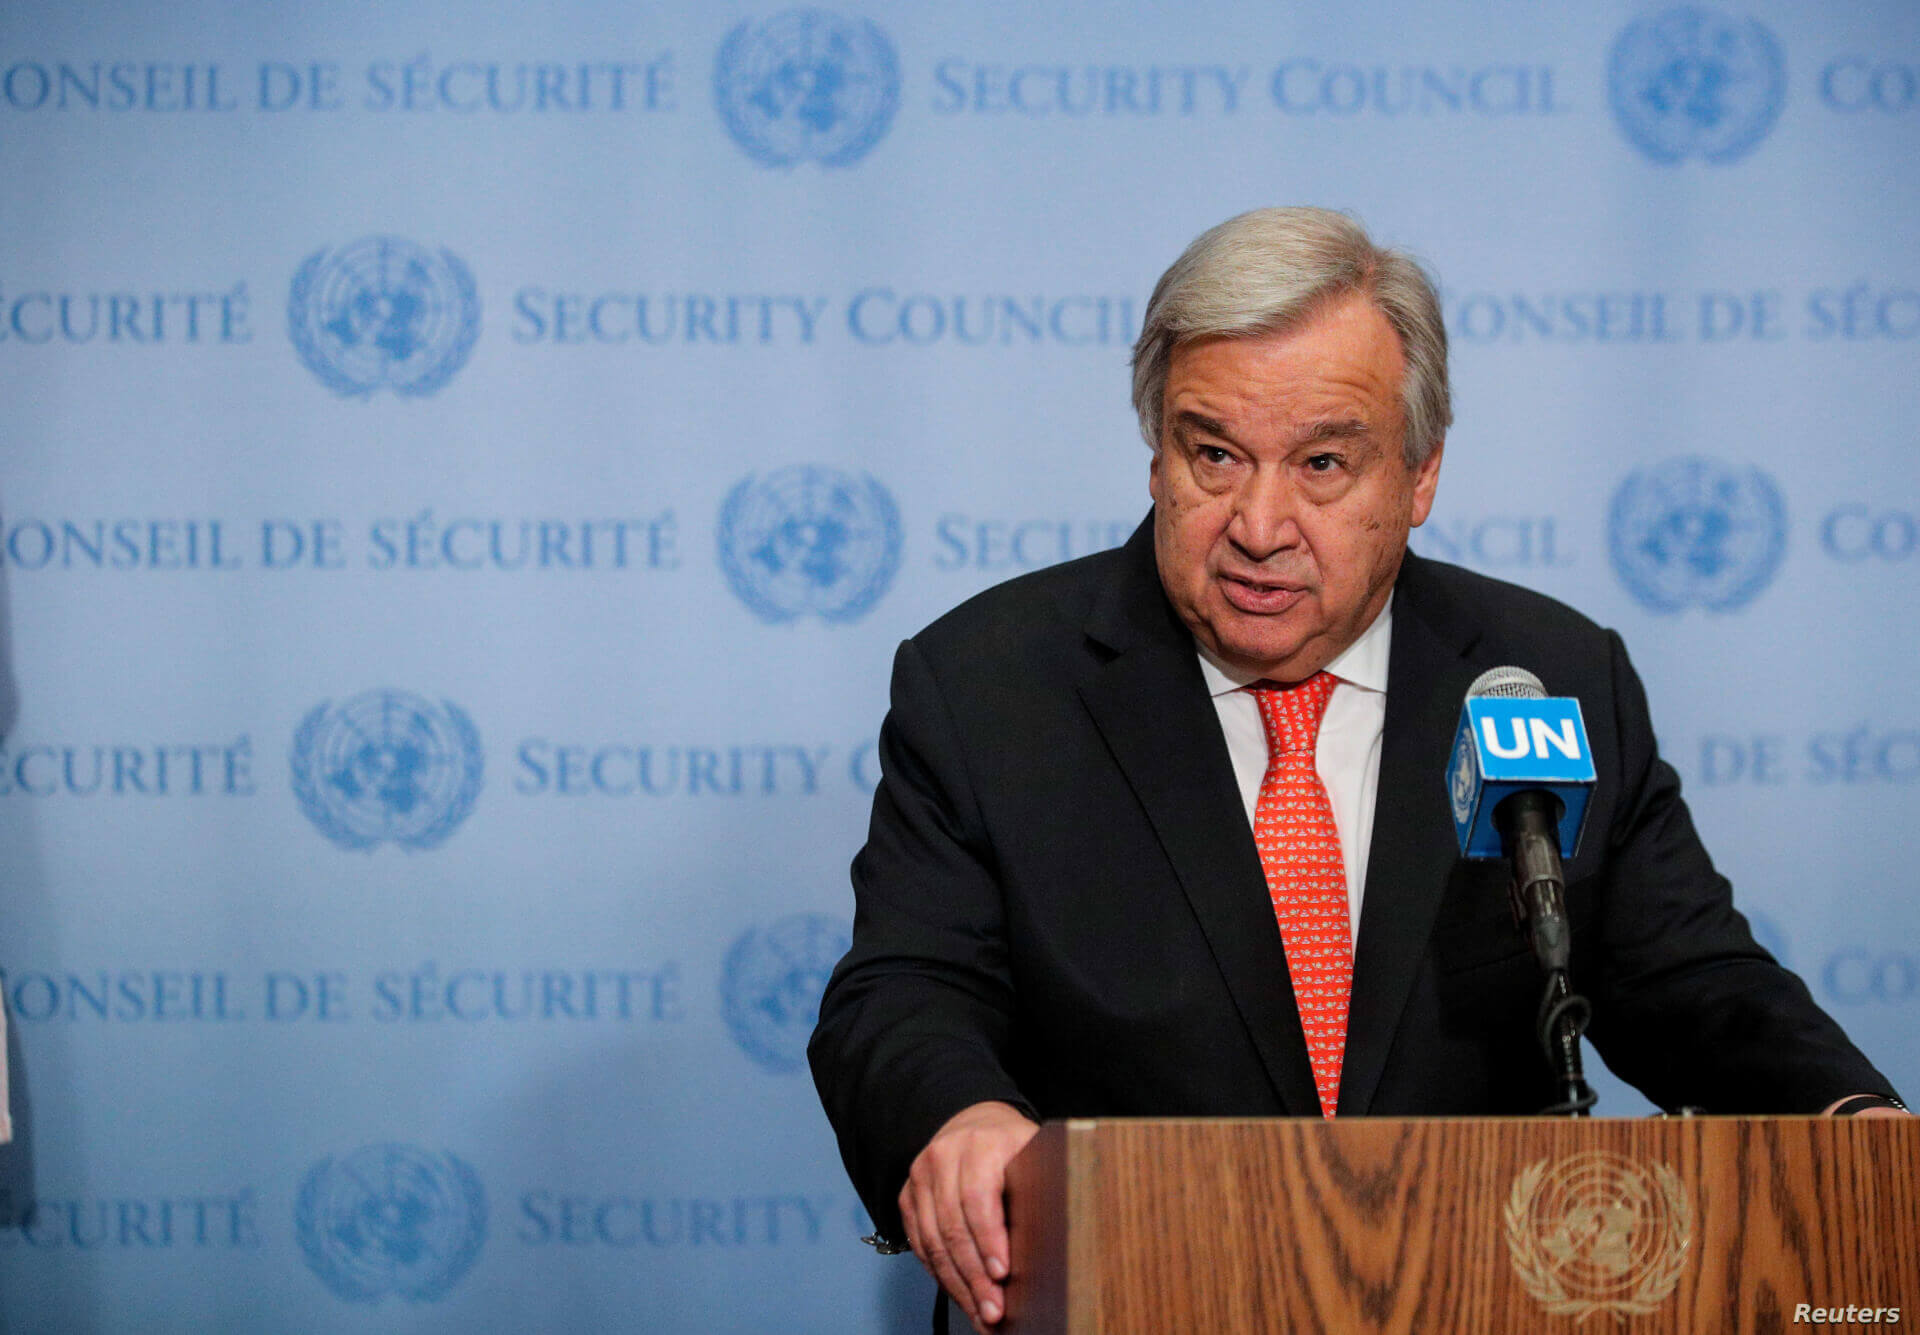 UN Secretary-General Says Developed Countries Can Learn From Africa’s COVID-19 Response